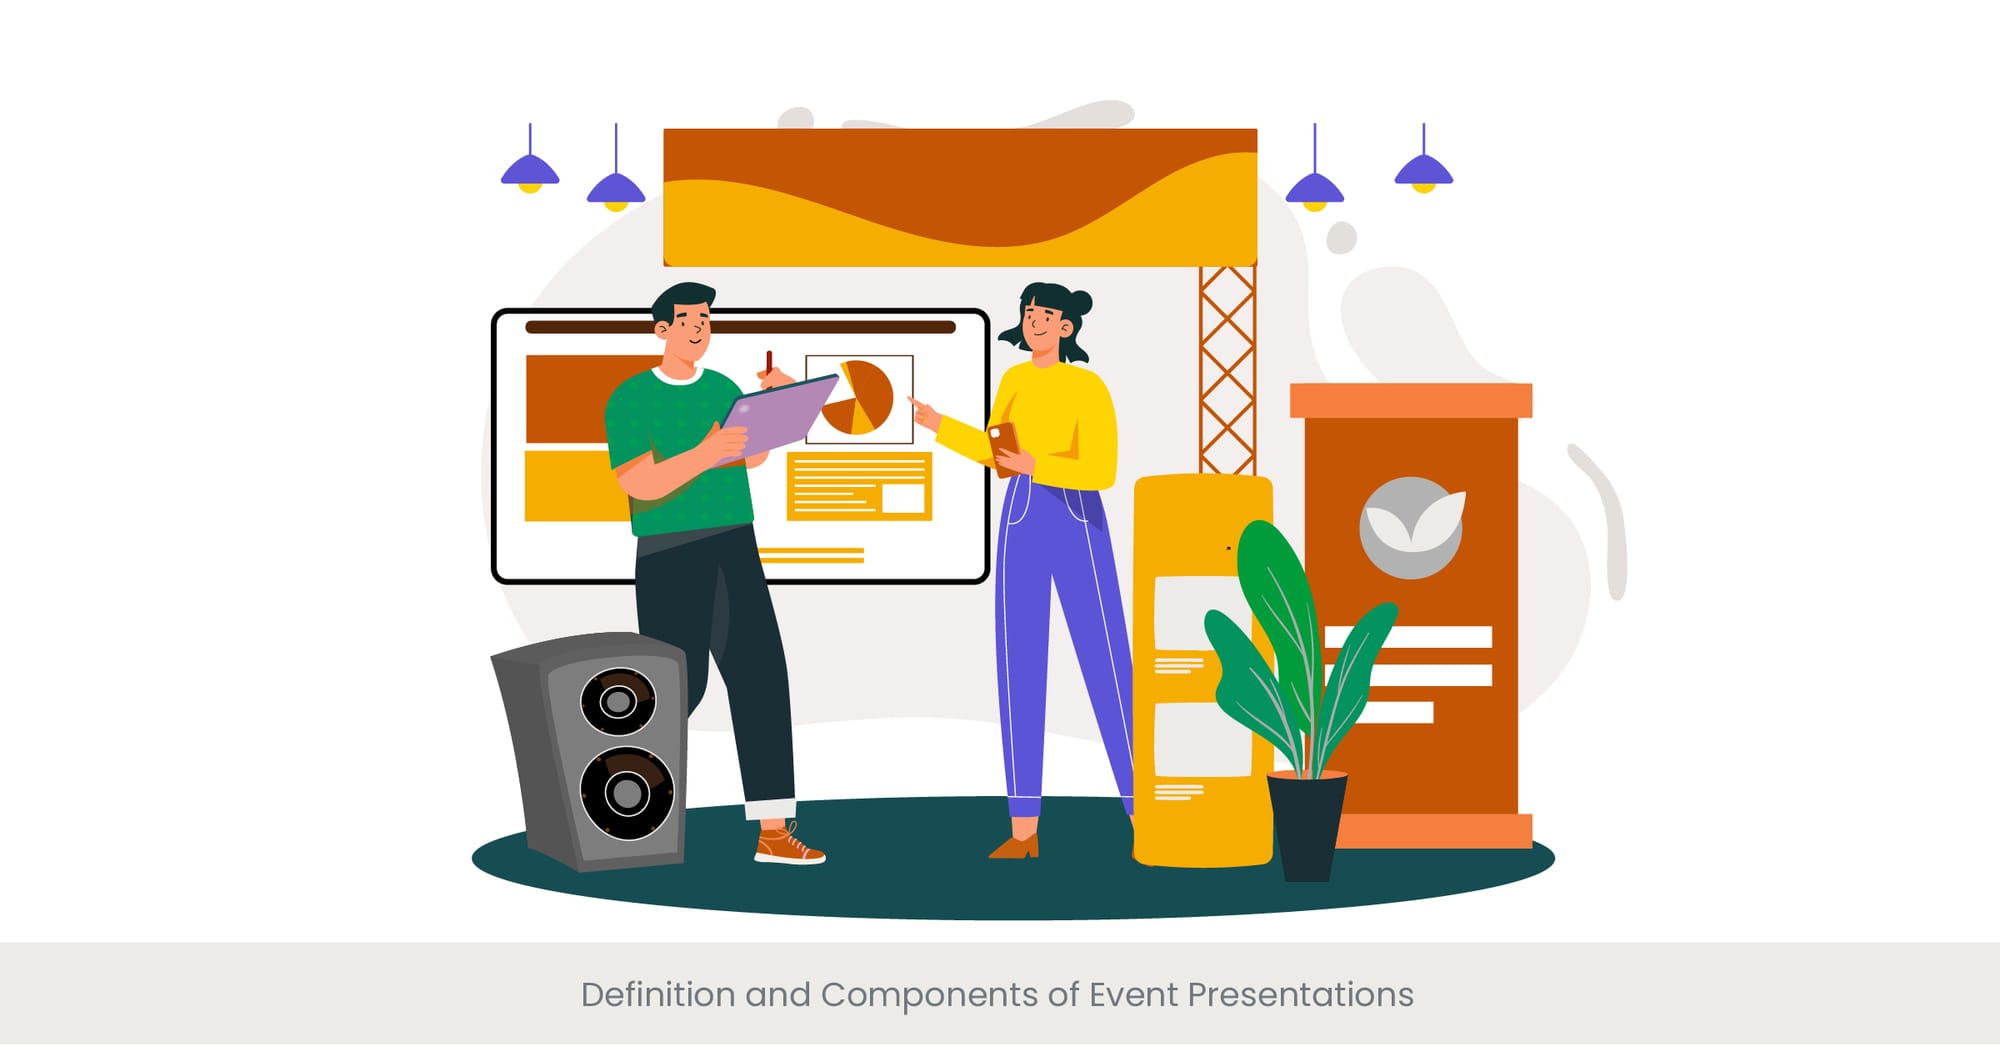 Definition and Components of Event Presentations